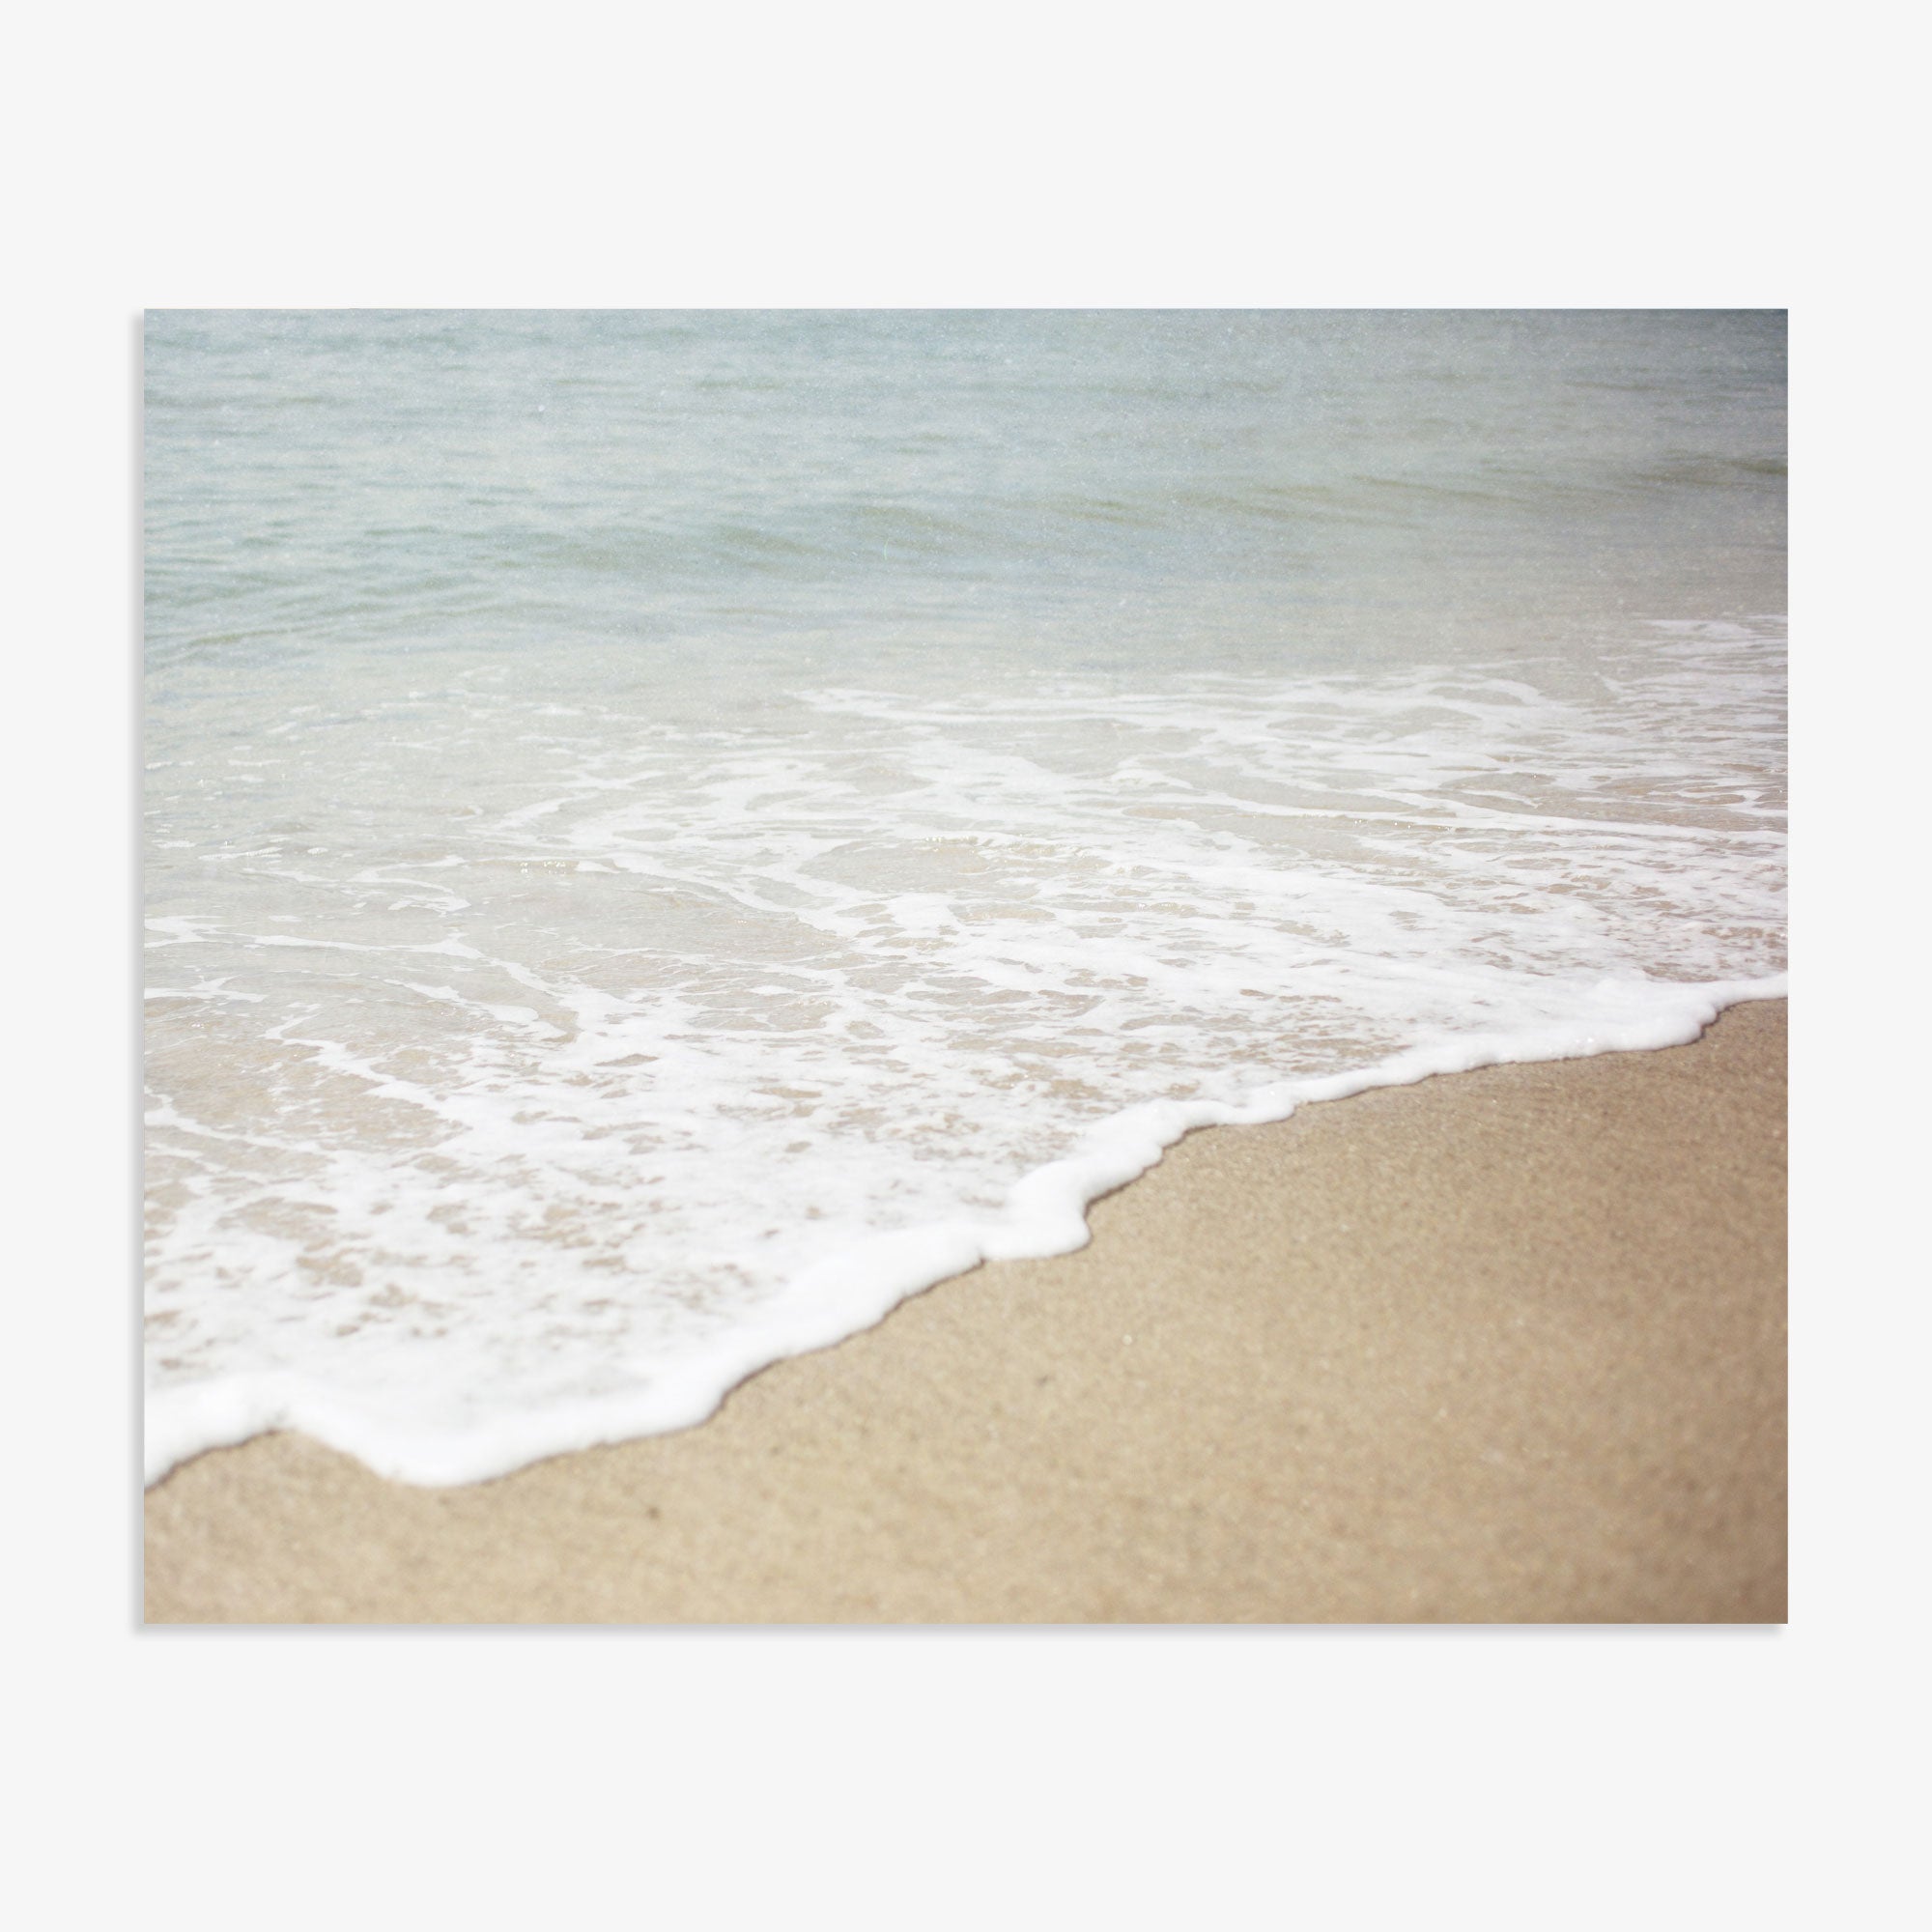 Gentle waves wash over a sandy beach in California, creating a soft, foamy edge where the water meets the shore, with a glimpse of the calm sea extending into the distance. Offley Green&#39;s Beach Waves Print, &#39;Chasing Surf&#39;.